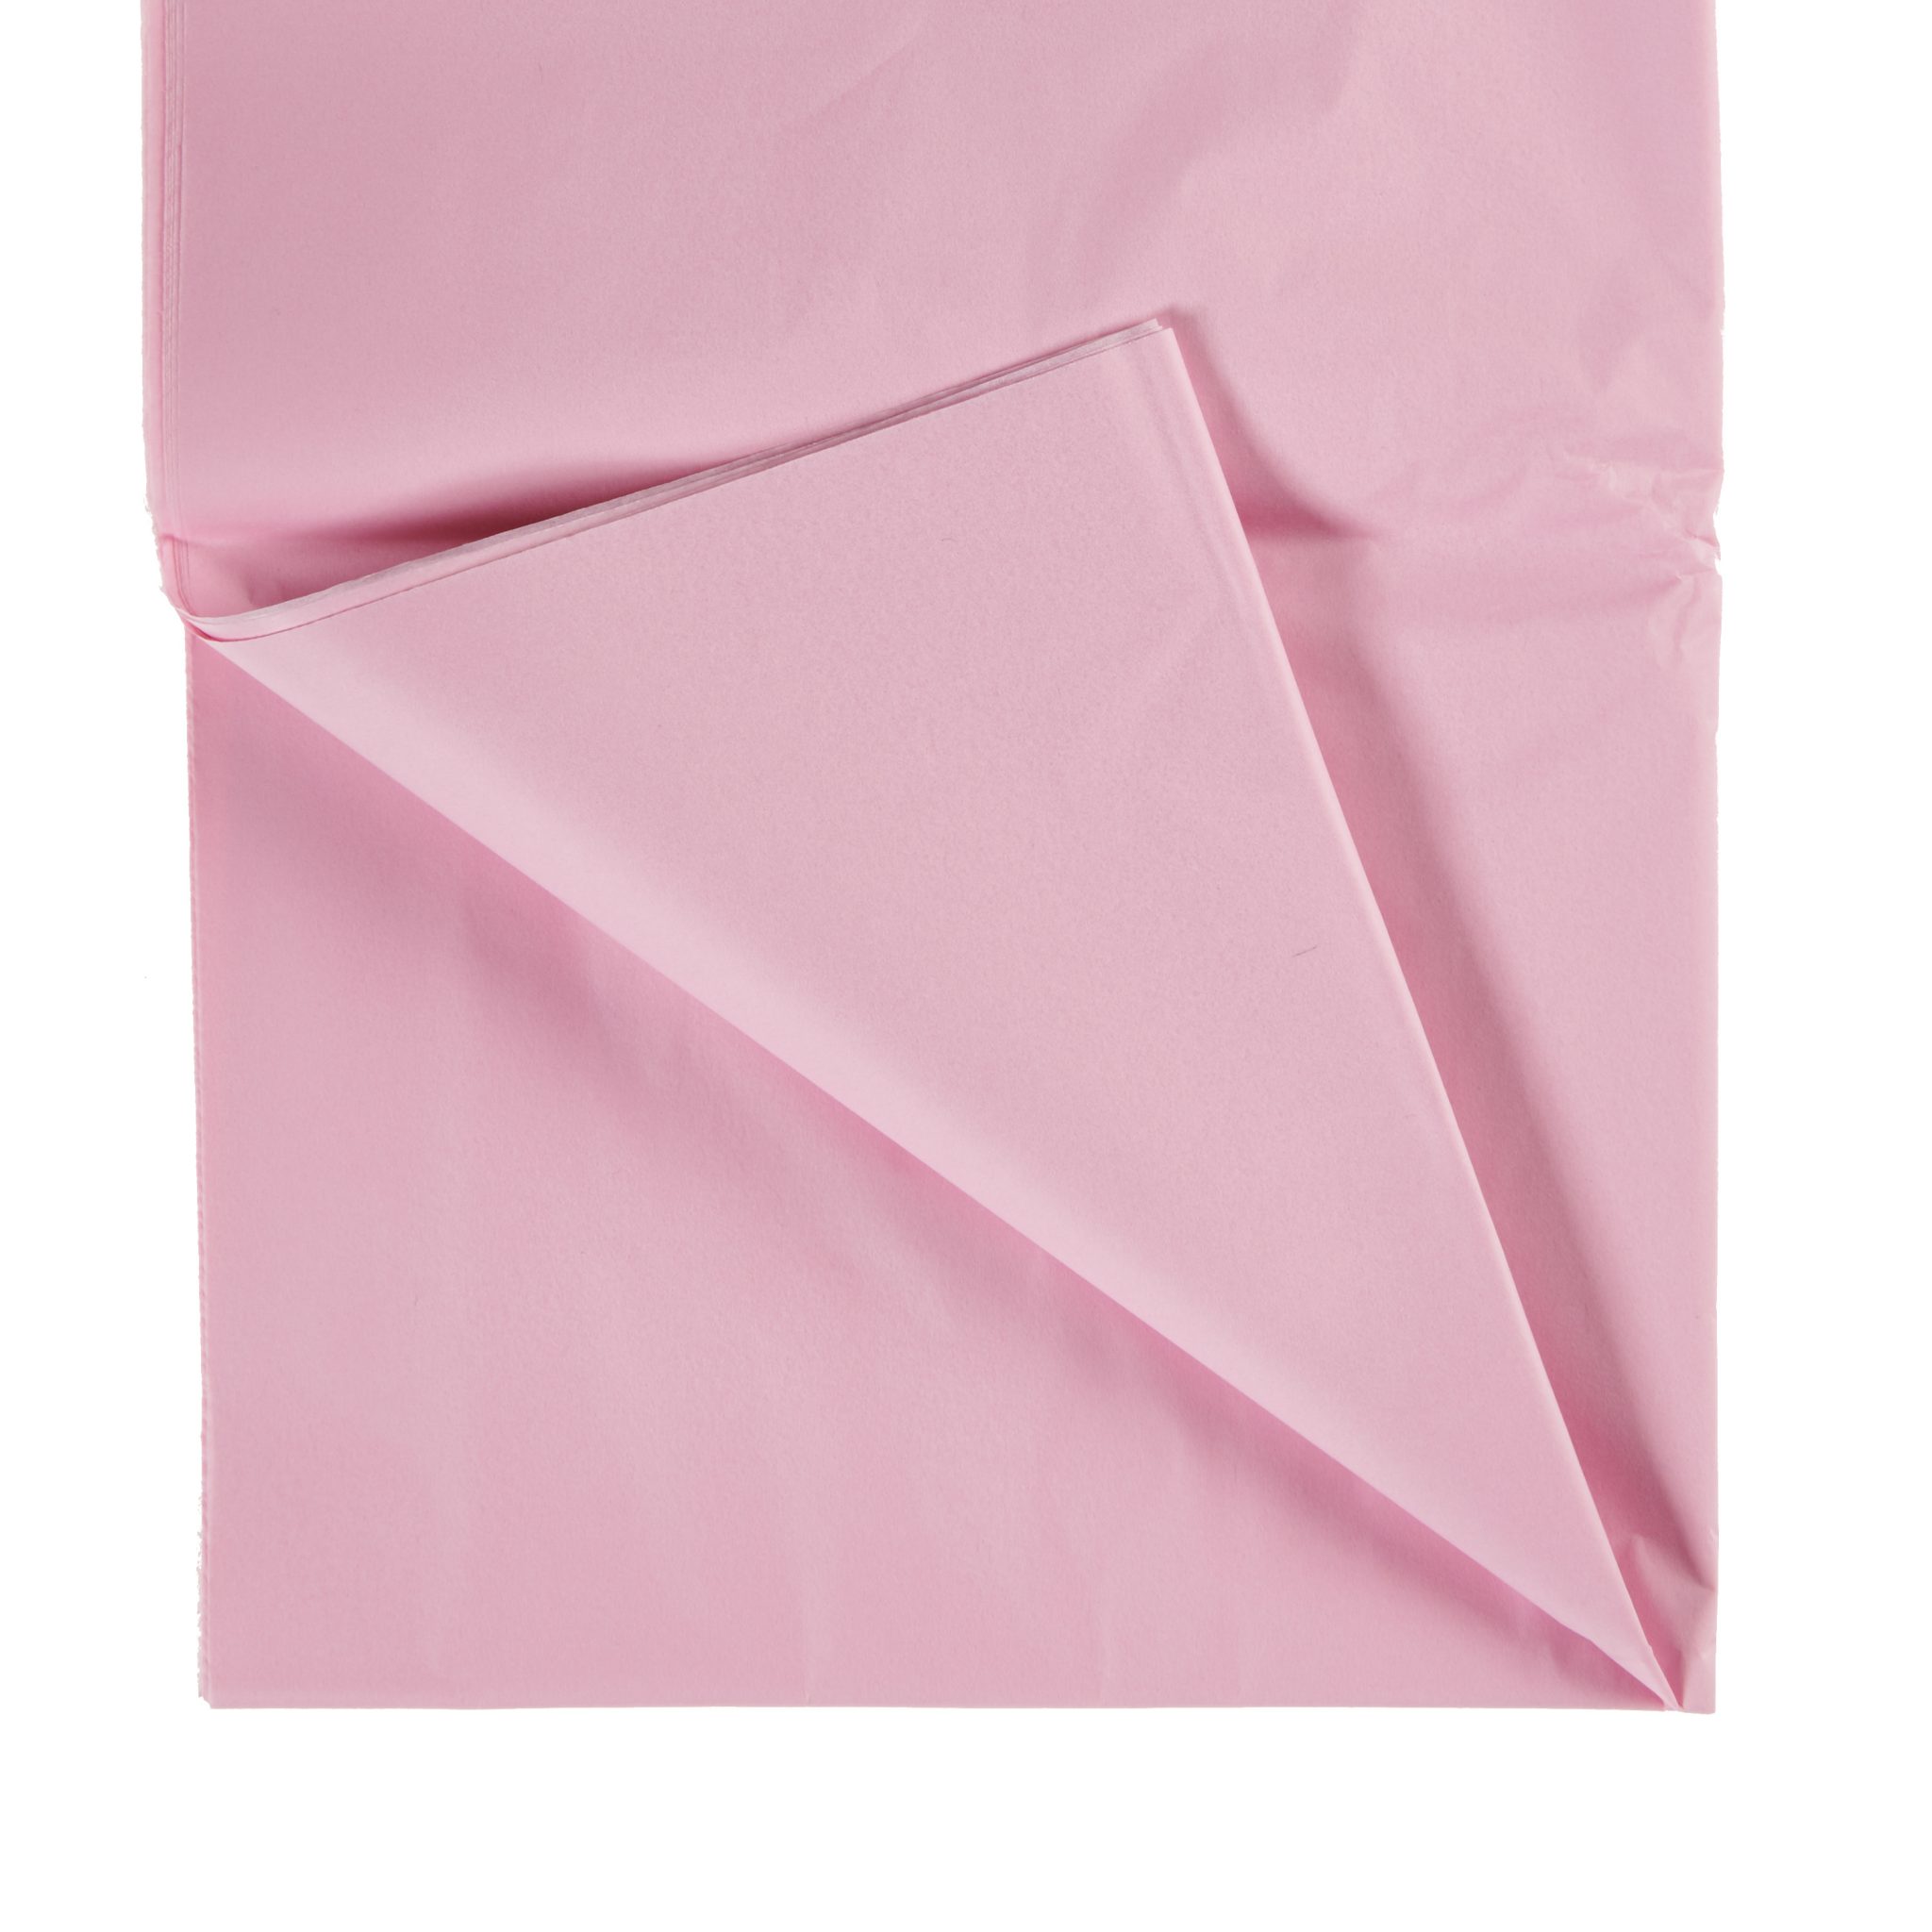 Coloured Tissue Paper - Packaging Products Online